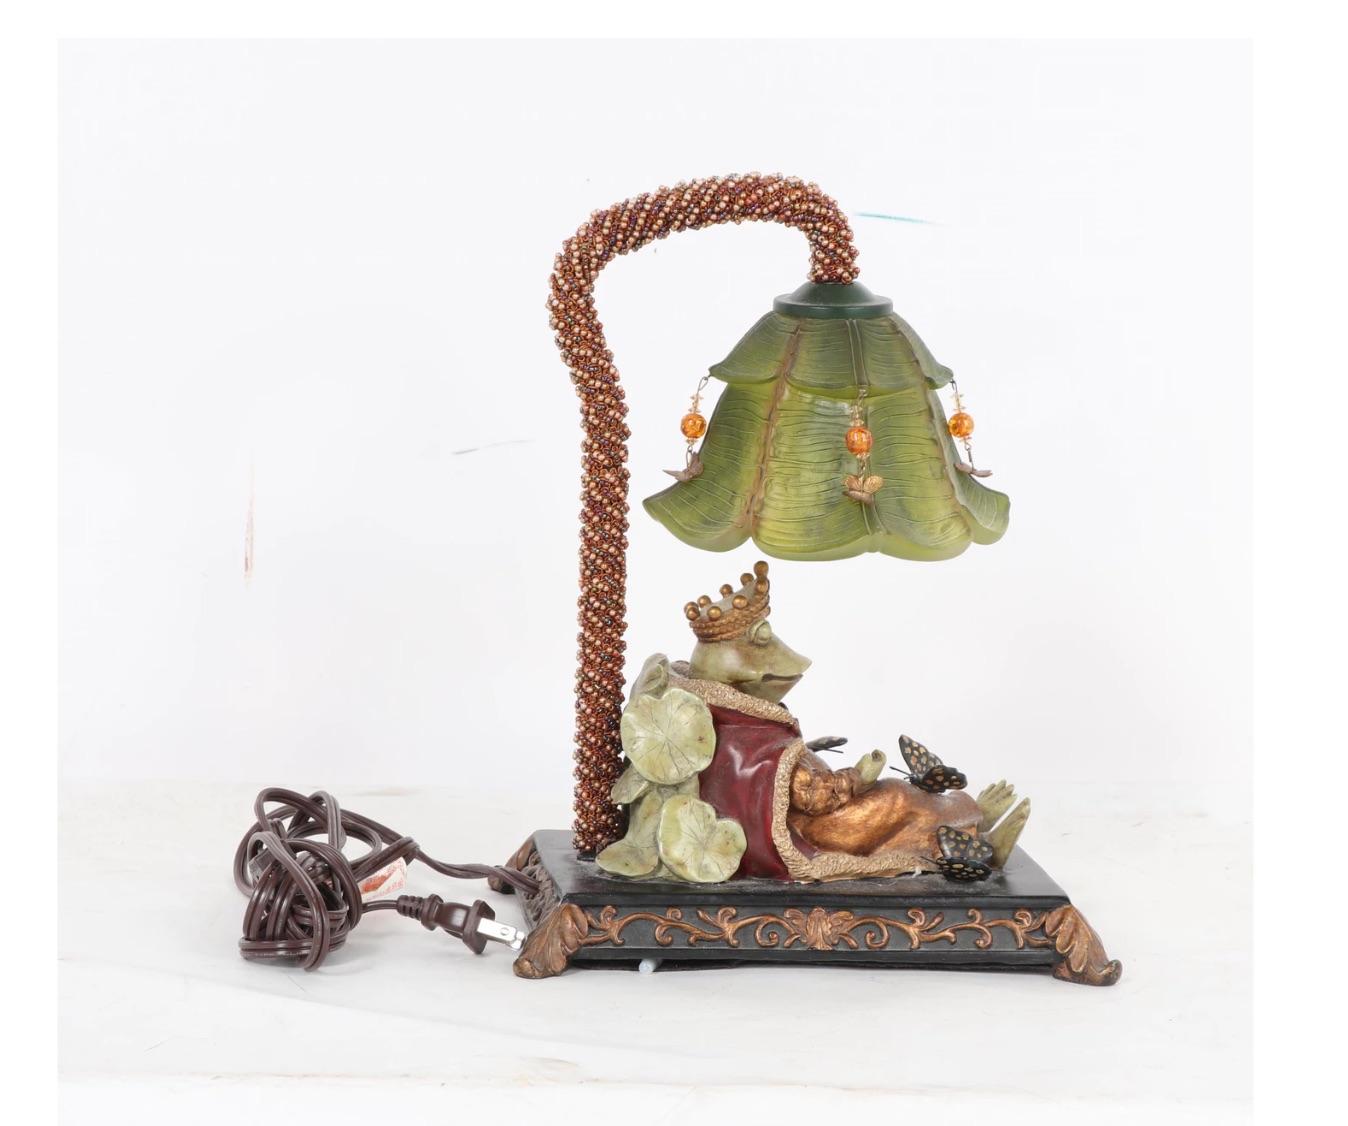  most adorable resin frog figure with faux jeweled crown and princely cape, reclining on lily pads with butterflies about him, all under a resin gradated green translucent articulated lily flower shade with hanging faux beads and gold butterfly